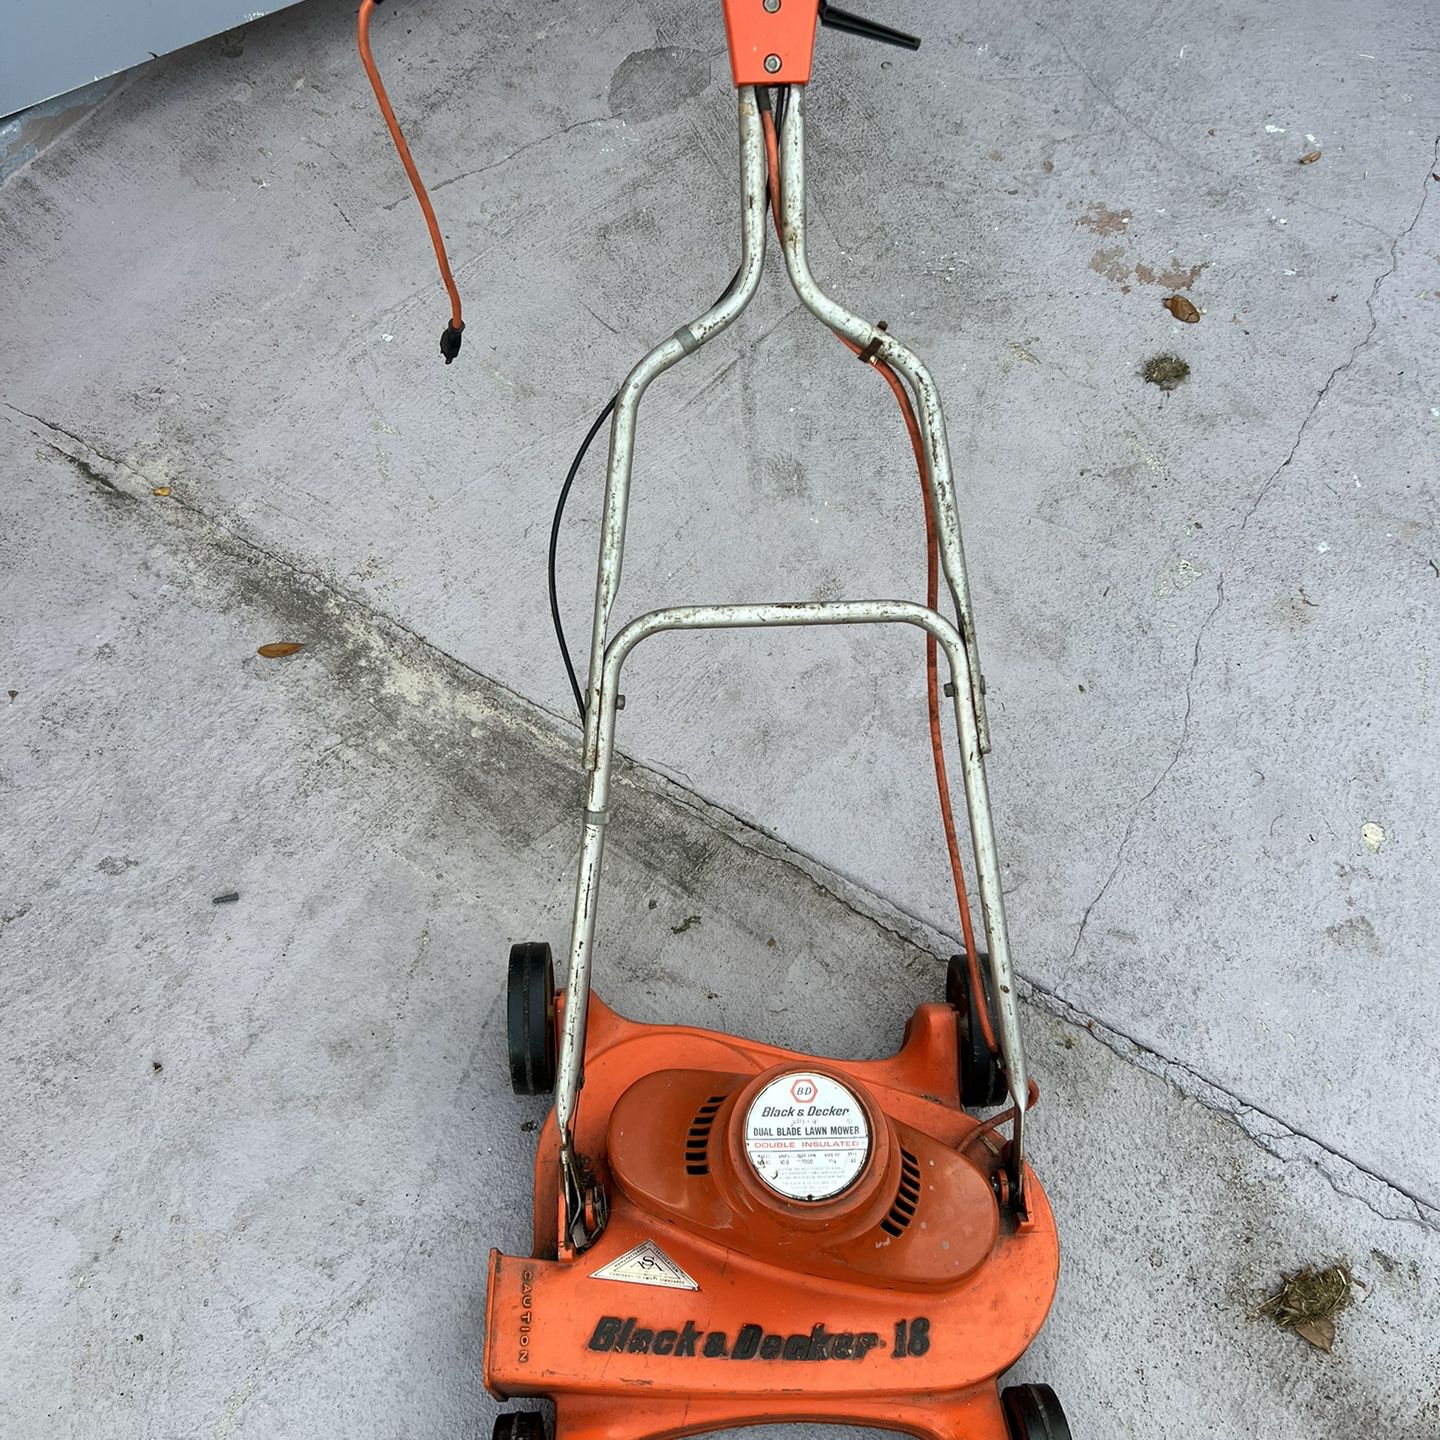 Lawn Mower - Black + Decker Corded Electric Mower for Sale in Vancouver, WA  - OfferUp